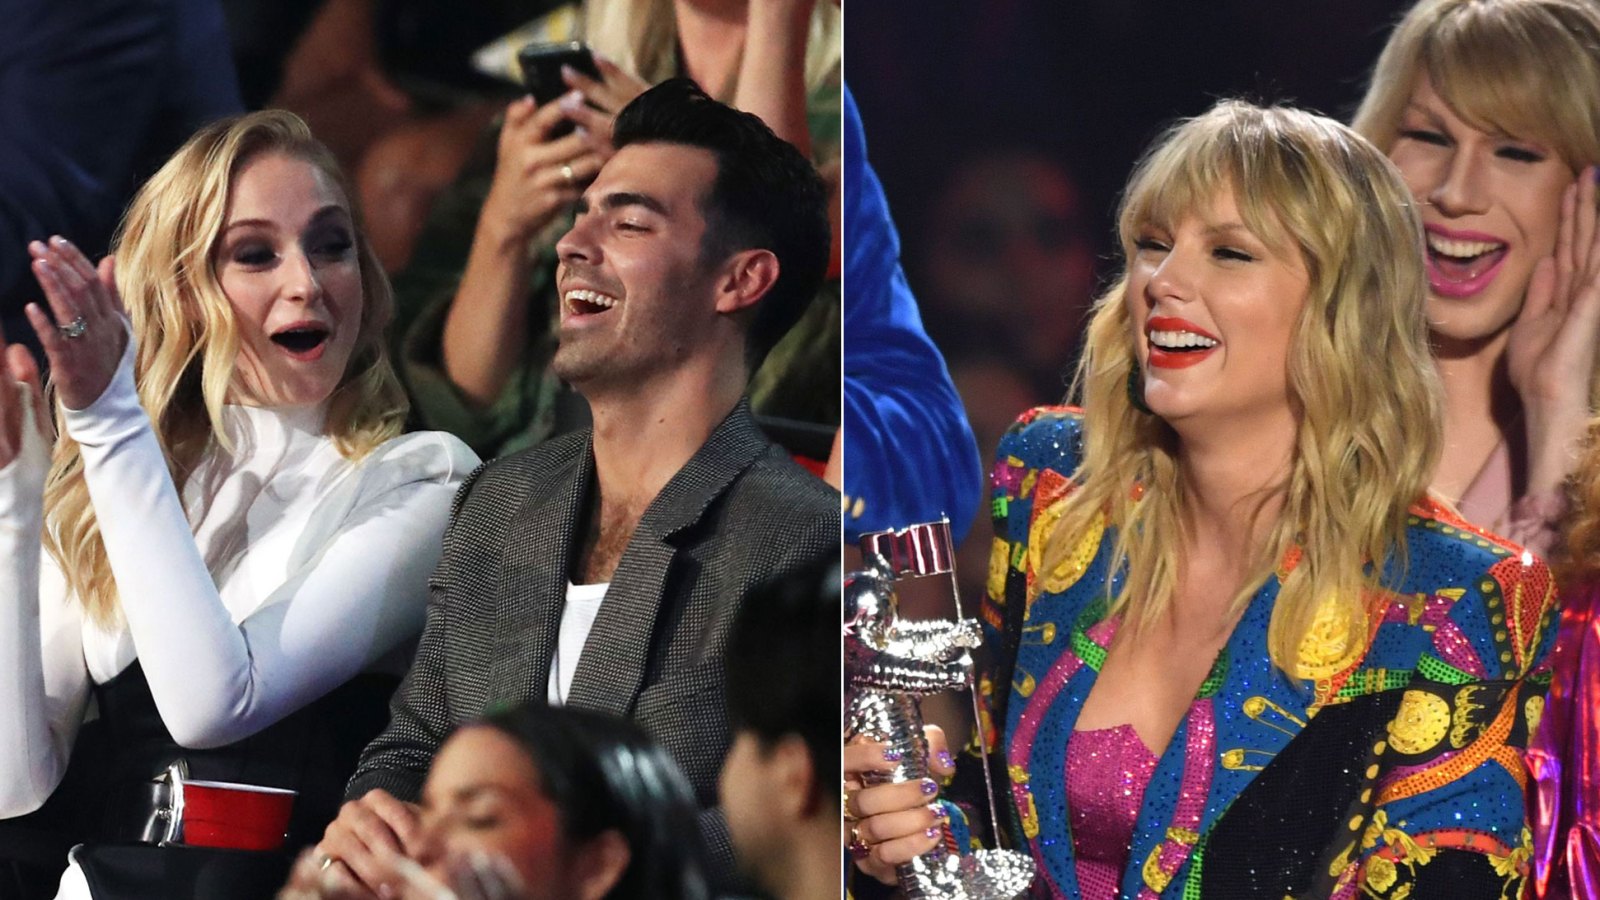 Joe Jonas and Sophie Turner Give His Ex Taylor Swift a Standing Ovation at the VMAs